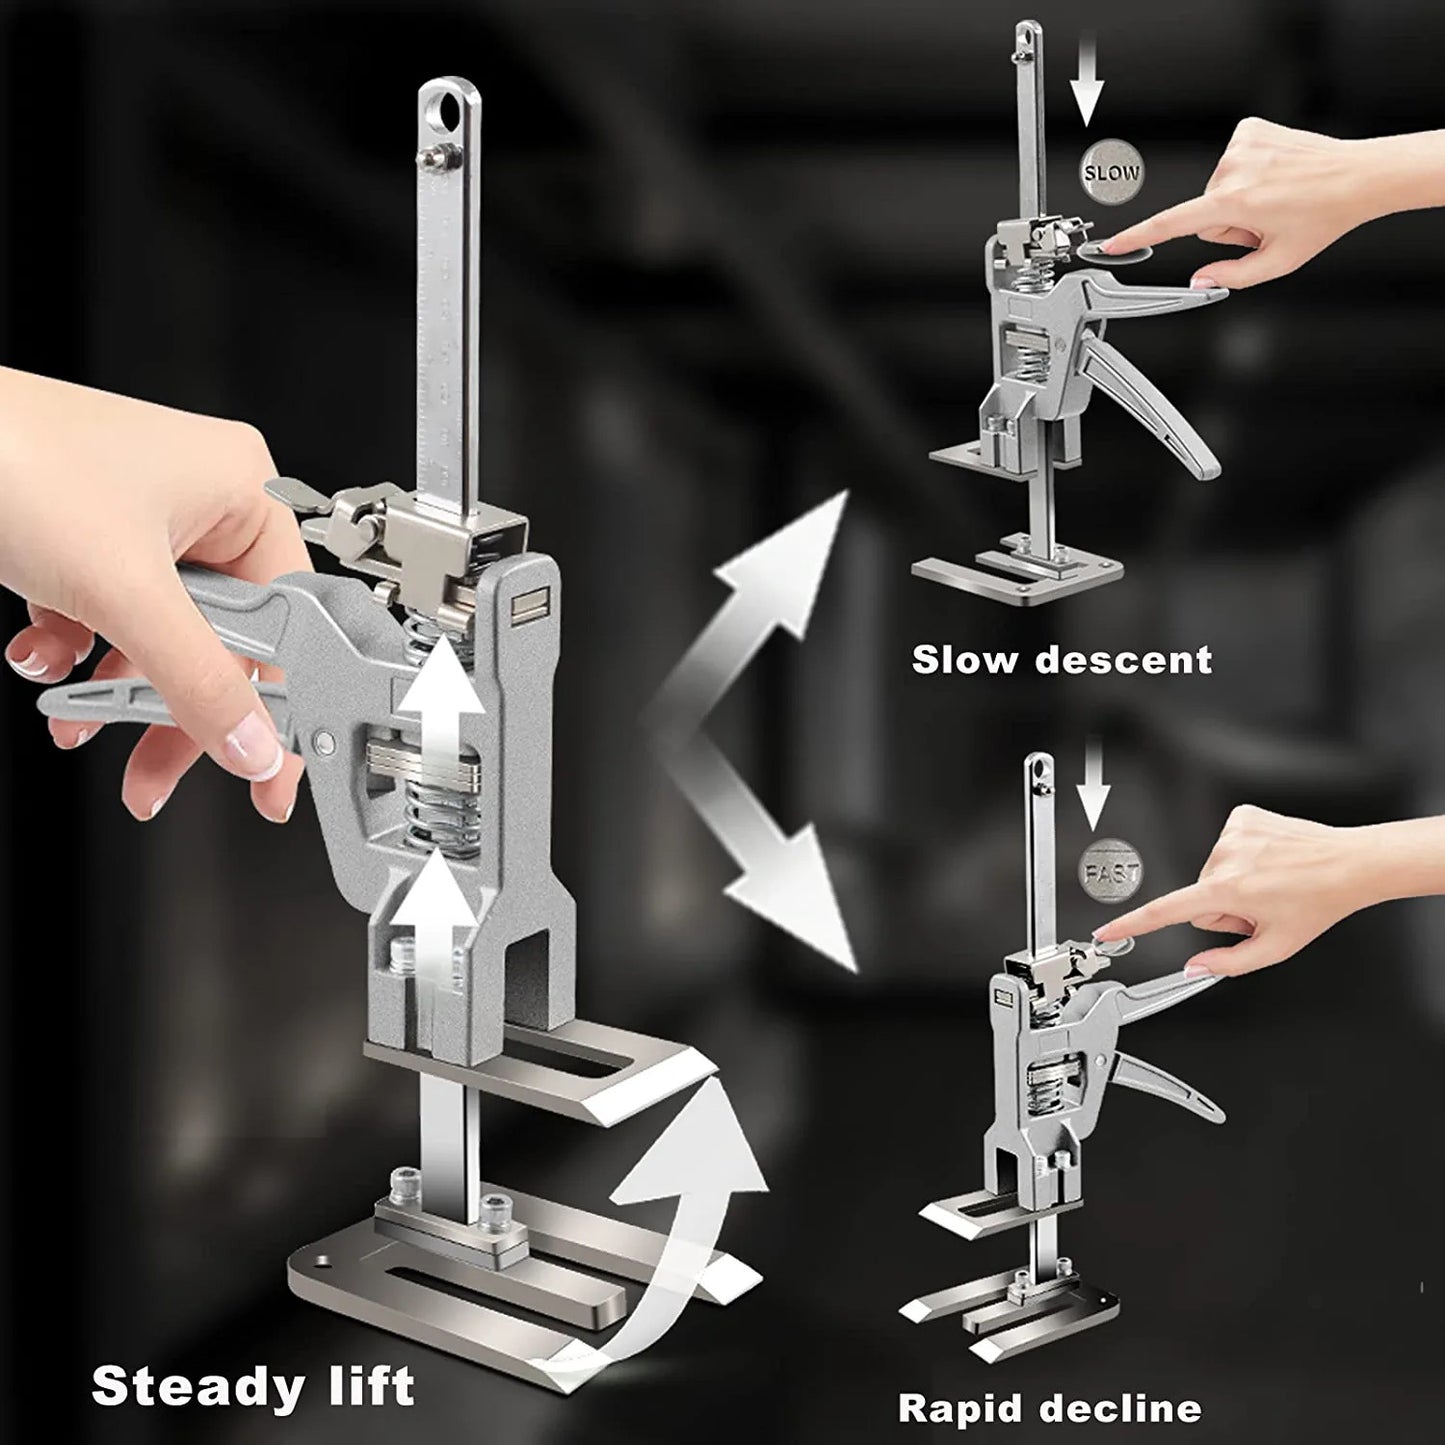 [365Famtools™ Latest Version] Labor Saving Arm Jack With Two Drop Modes